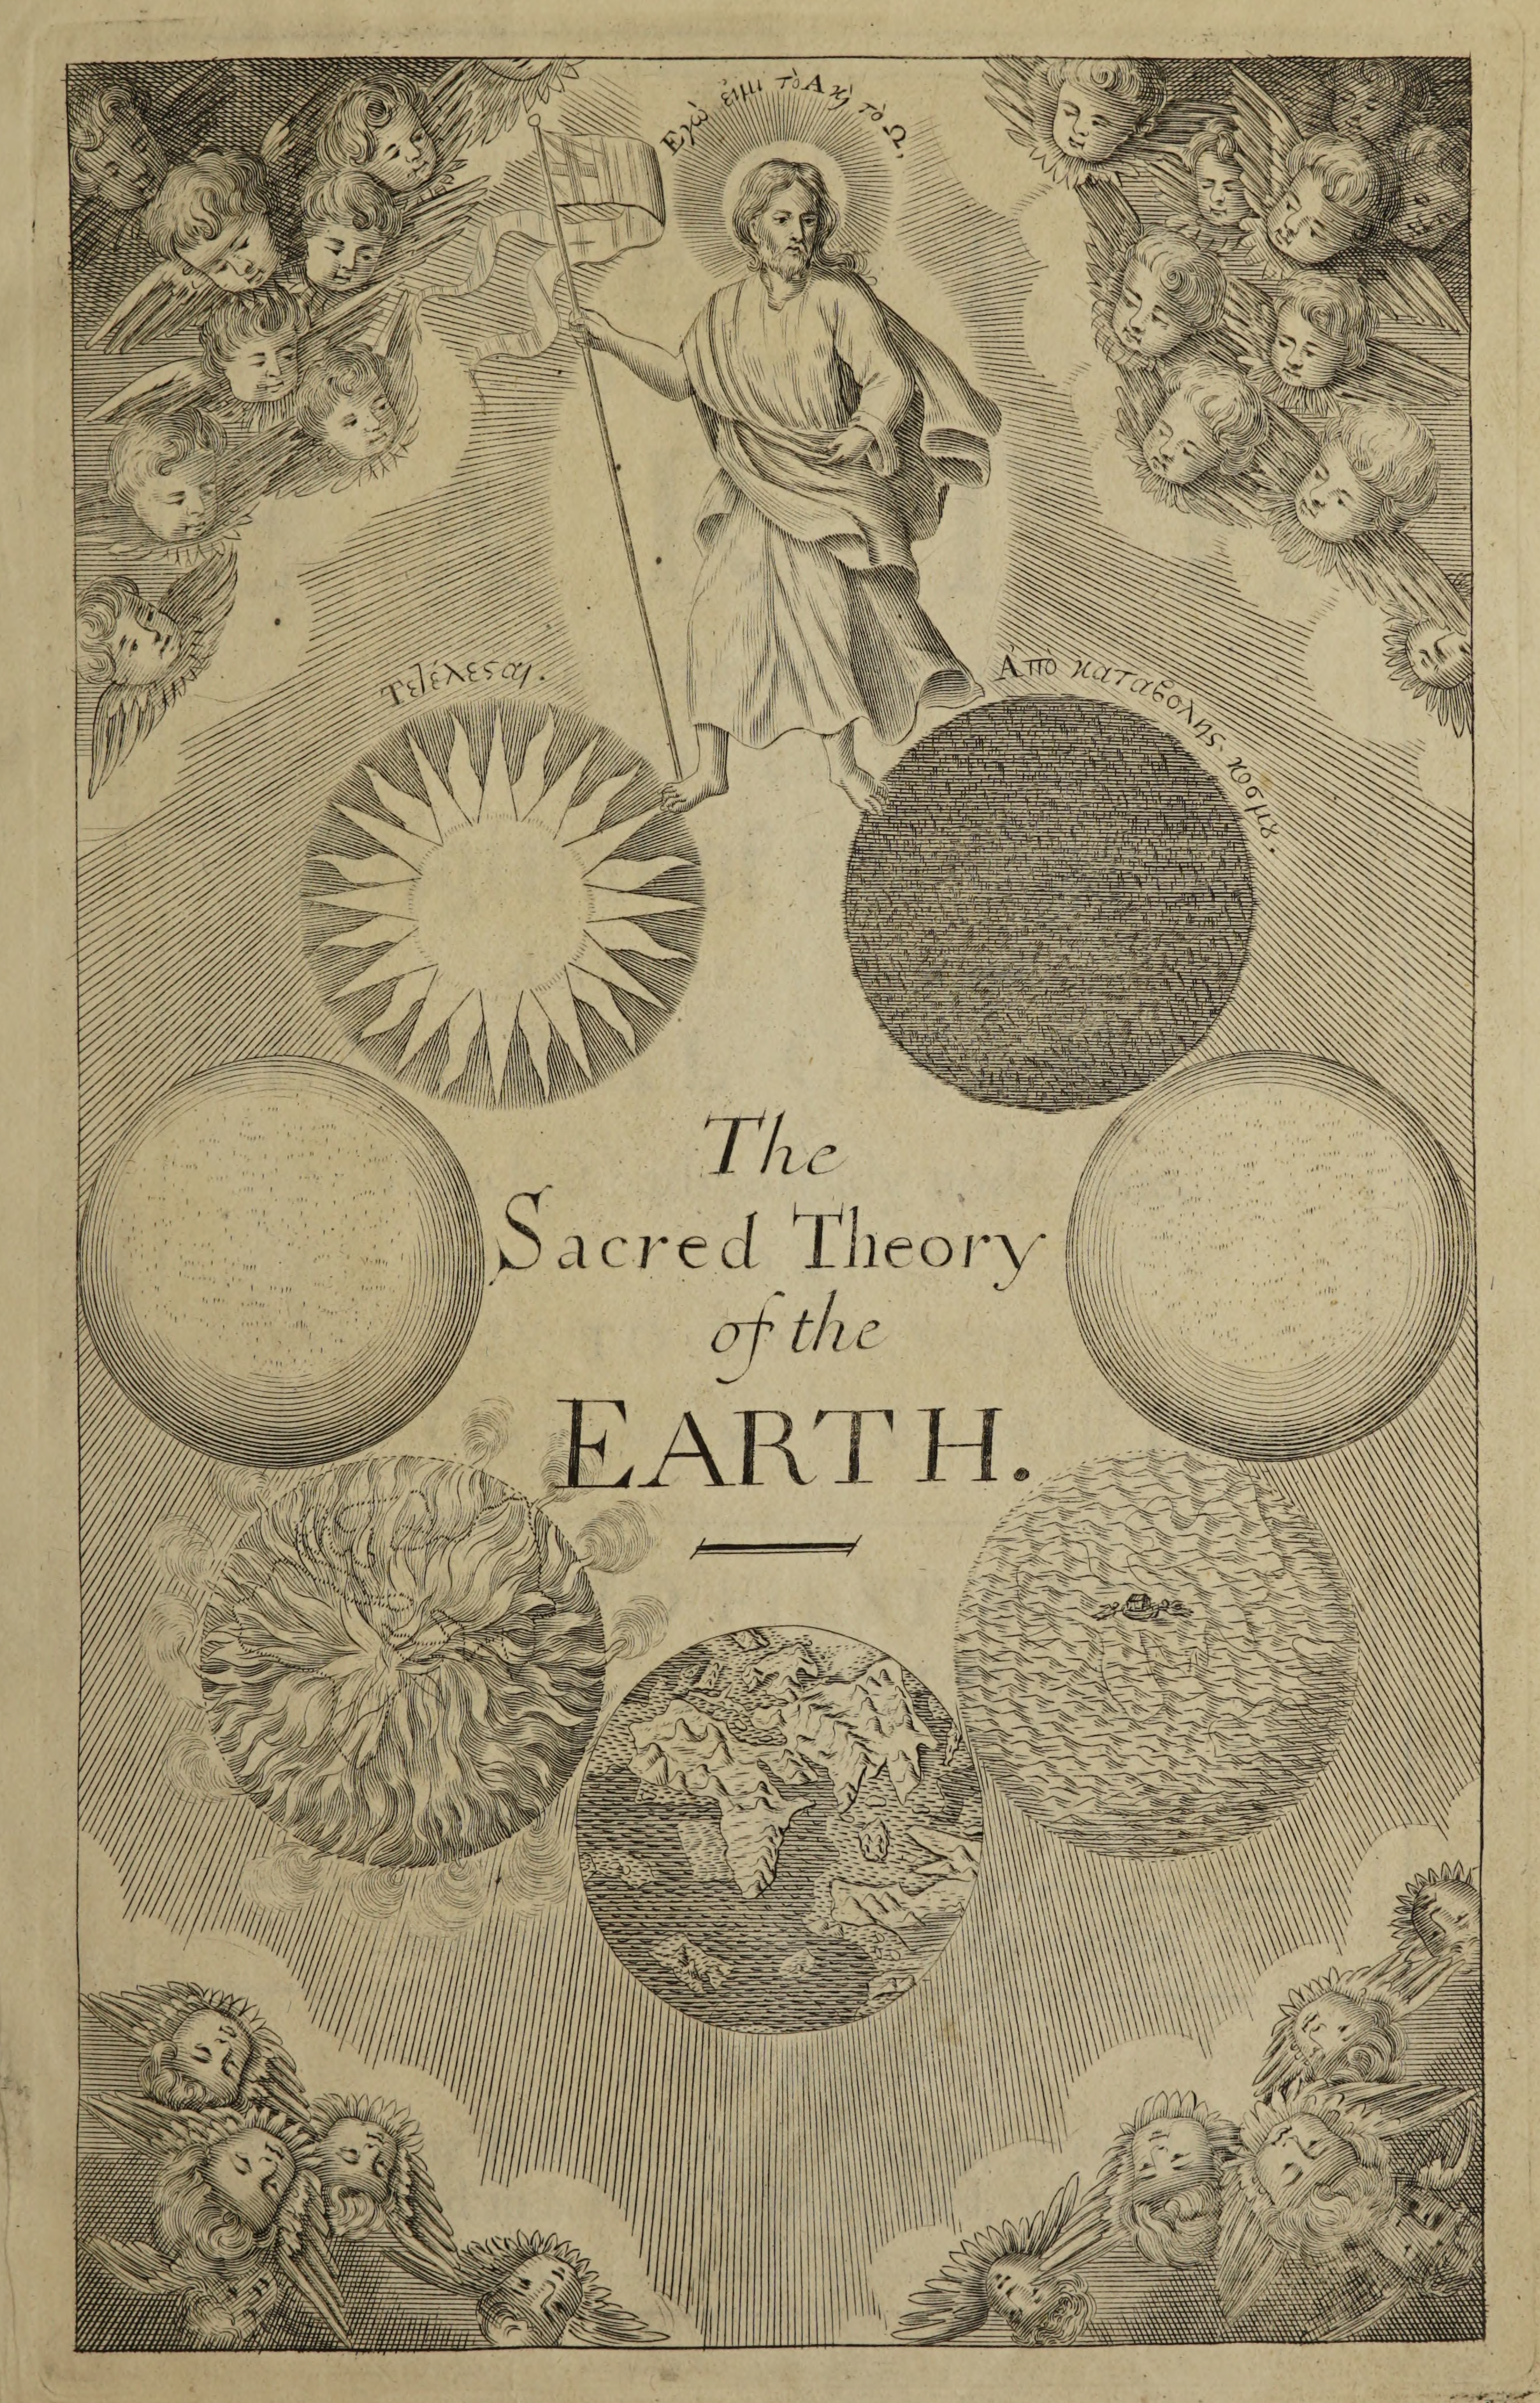 Frontispiece showing series of orbs, one clearly the sun, surrounding title "Sacred Theory of the Earth" and with angels looking on from corners.